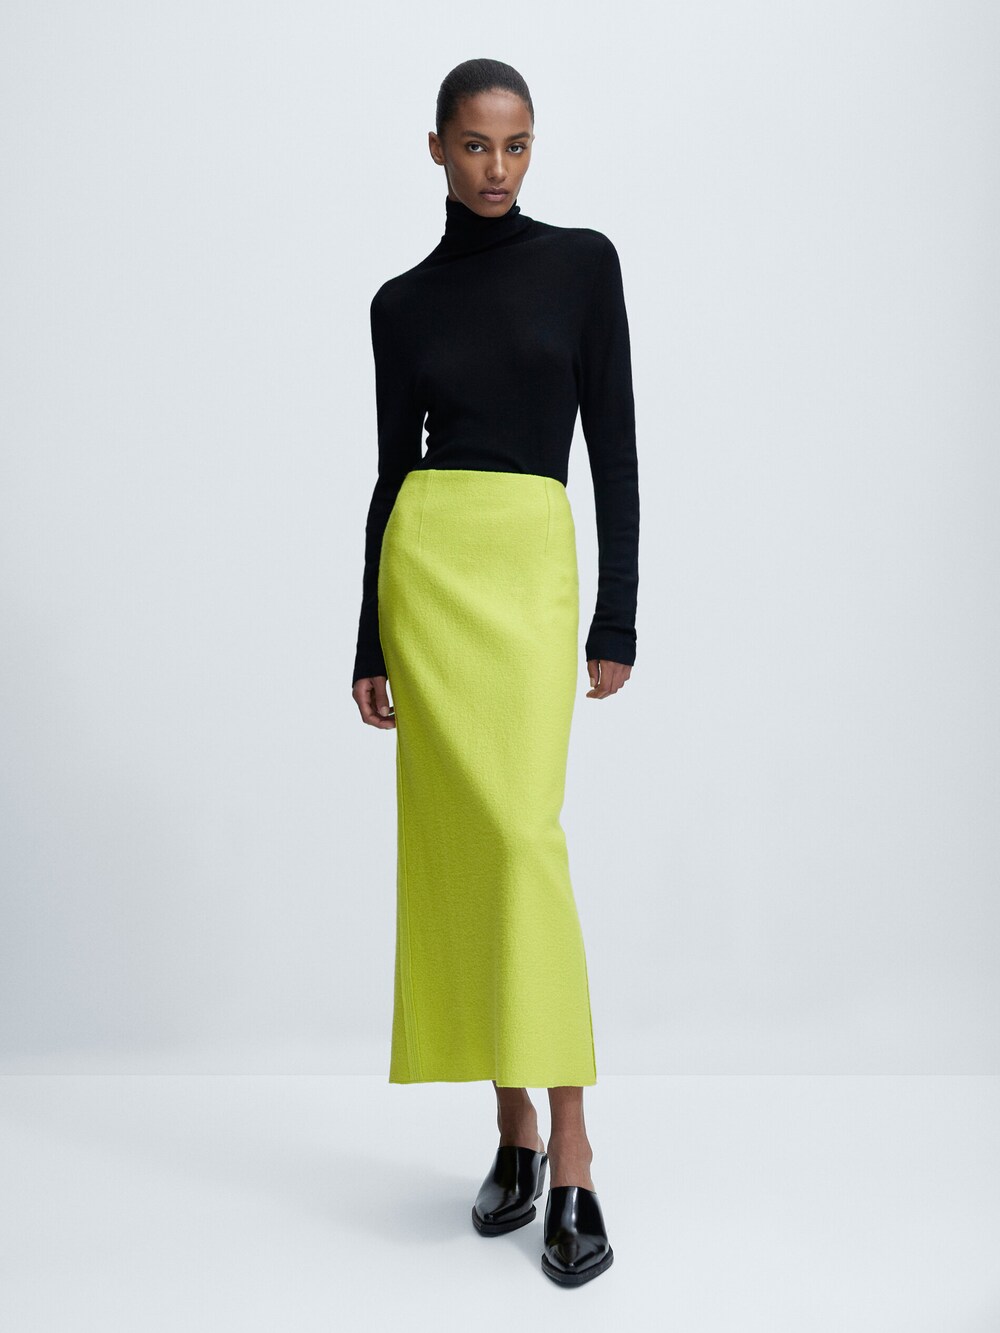 Massimo Dutti Lime coloured fitted wool maxi skirt with centre back split and invisible centre back zip. It has a high waist and darts at the front. 